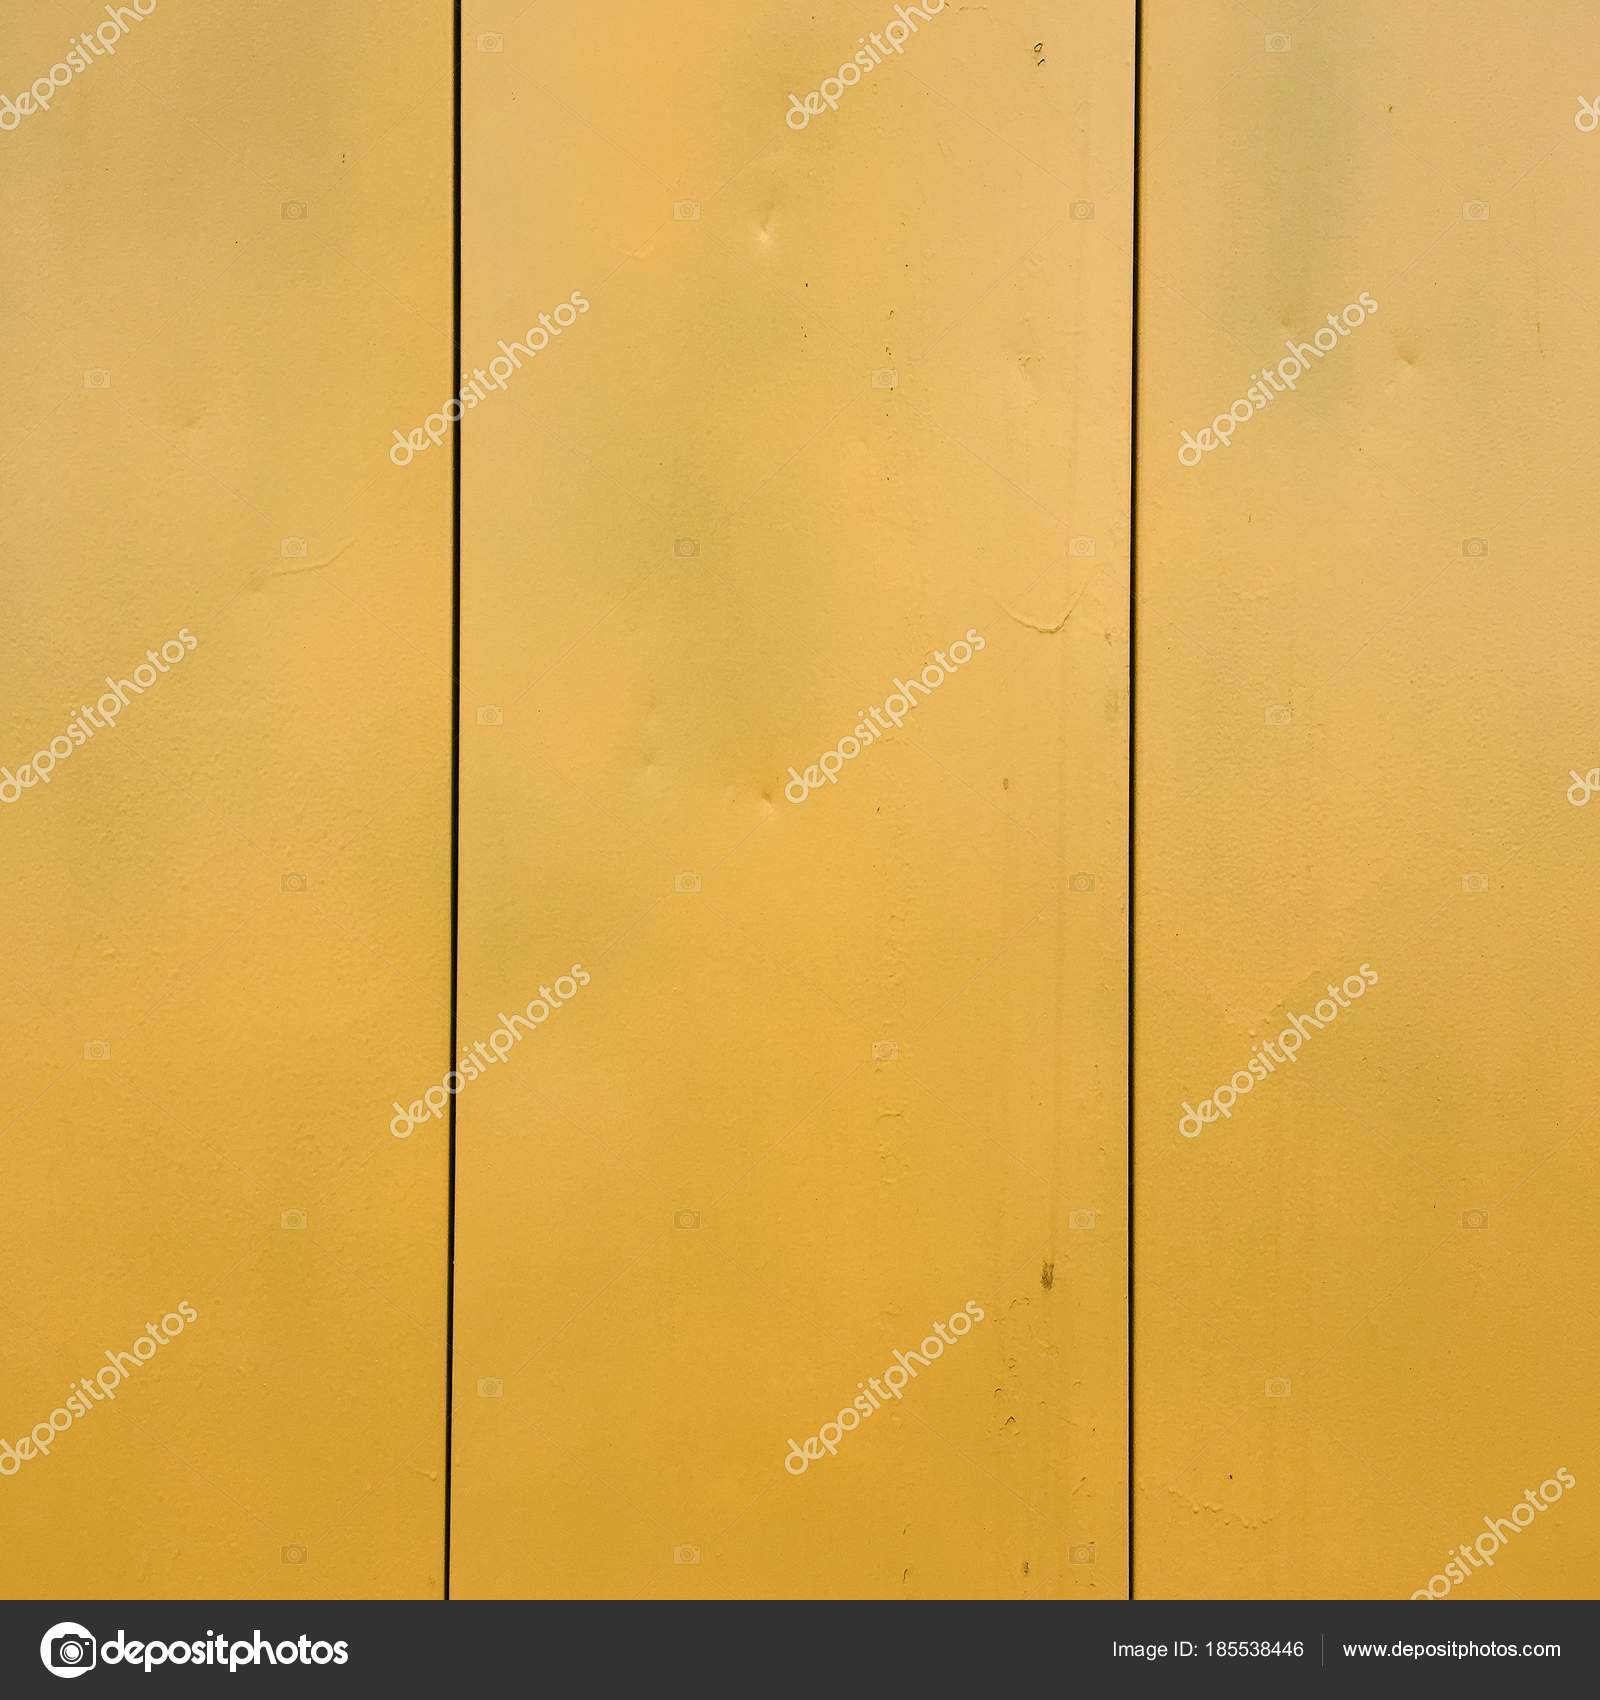 Rusty yellow painted steel metal. Stained rusty painted metal ...